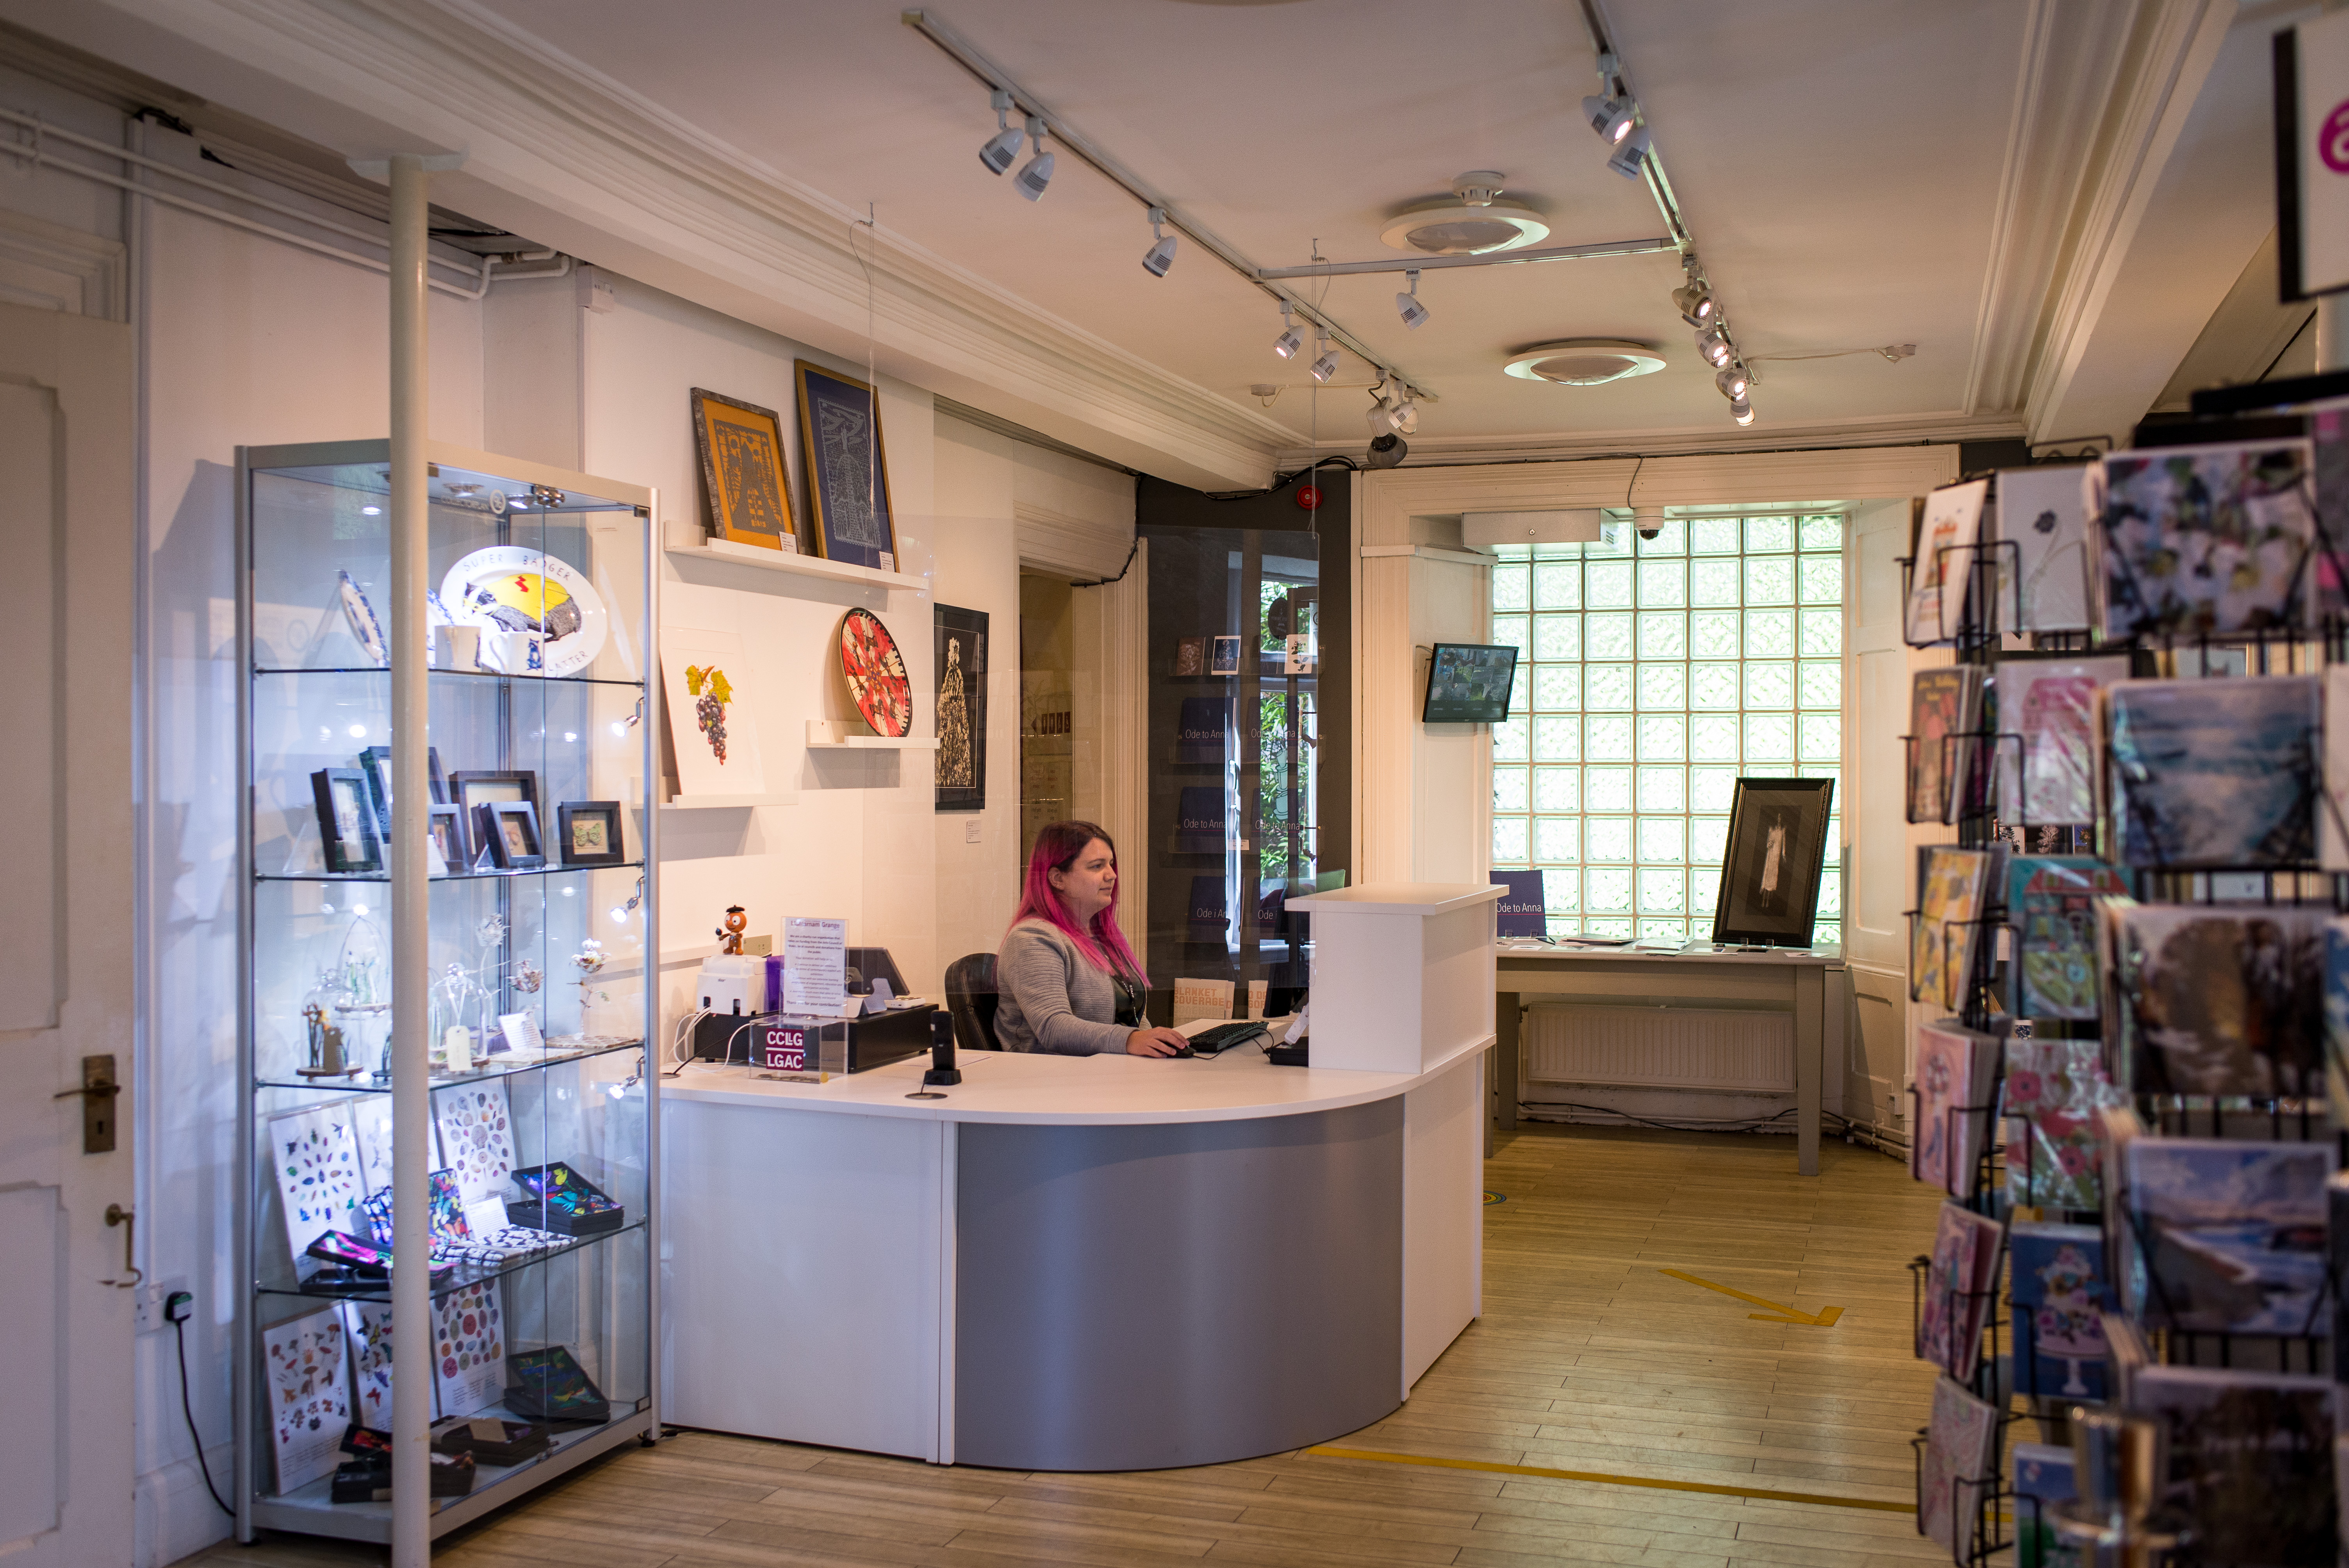 A view of our foyer. A rectangle room with doors that lead you to our galleries and craft shop. The front desk is curved and we have four display cases showing artist work